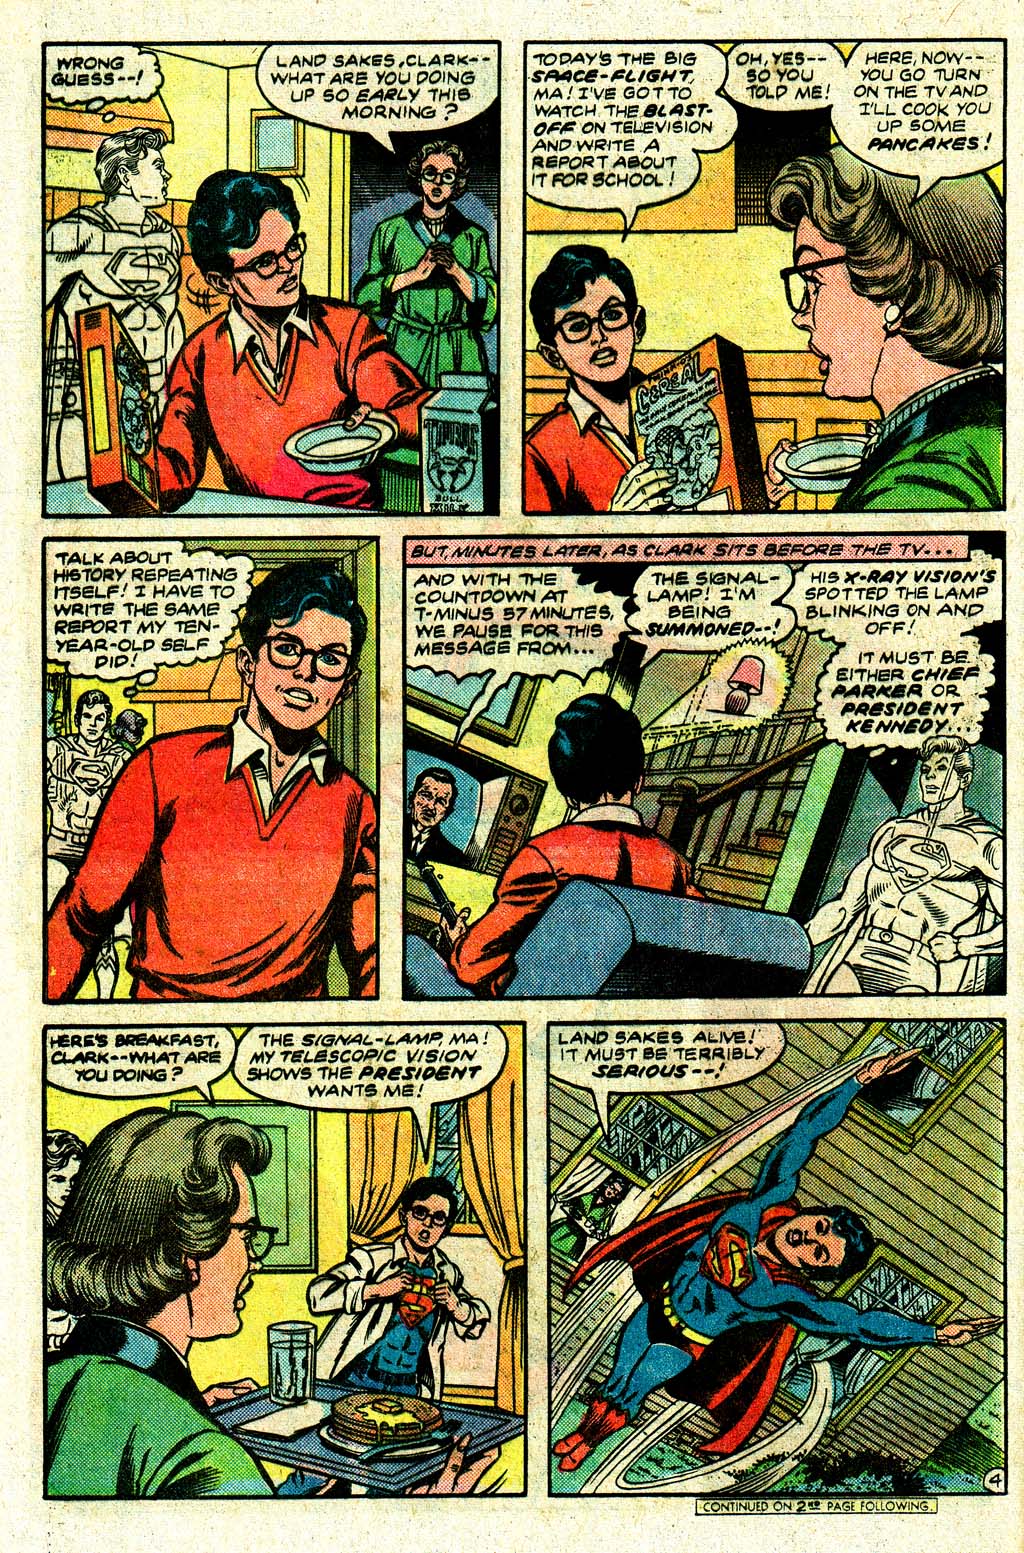 The New Adventures of Superboy 27 Page 27